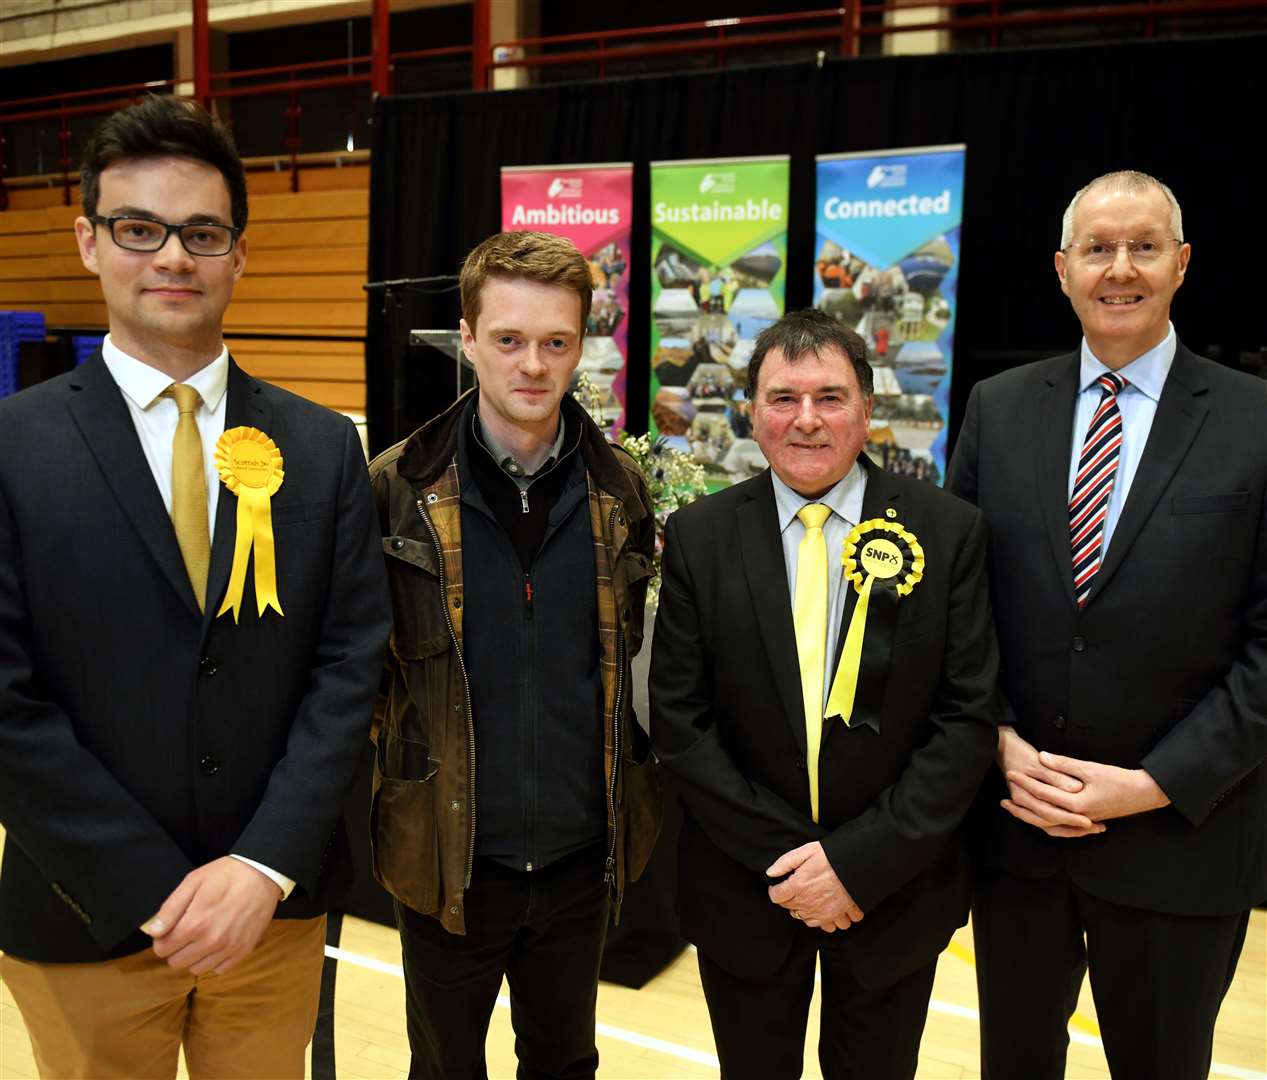 Councillors by Ward: 19 Inverness South: Colin Aitken (Scottish Liberal Democrats), Andrew Sinclair (Scottish Conservative and Unionist), Ken Gowans (Scottish National Party) and Duncan Macpherson (Independent). Picture: James Mackenzie